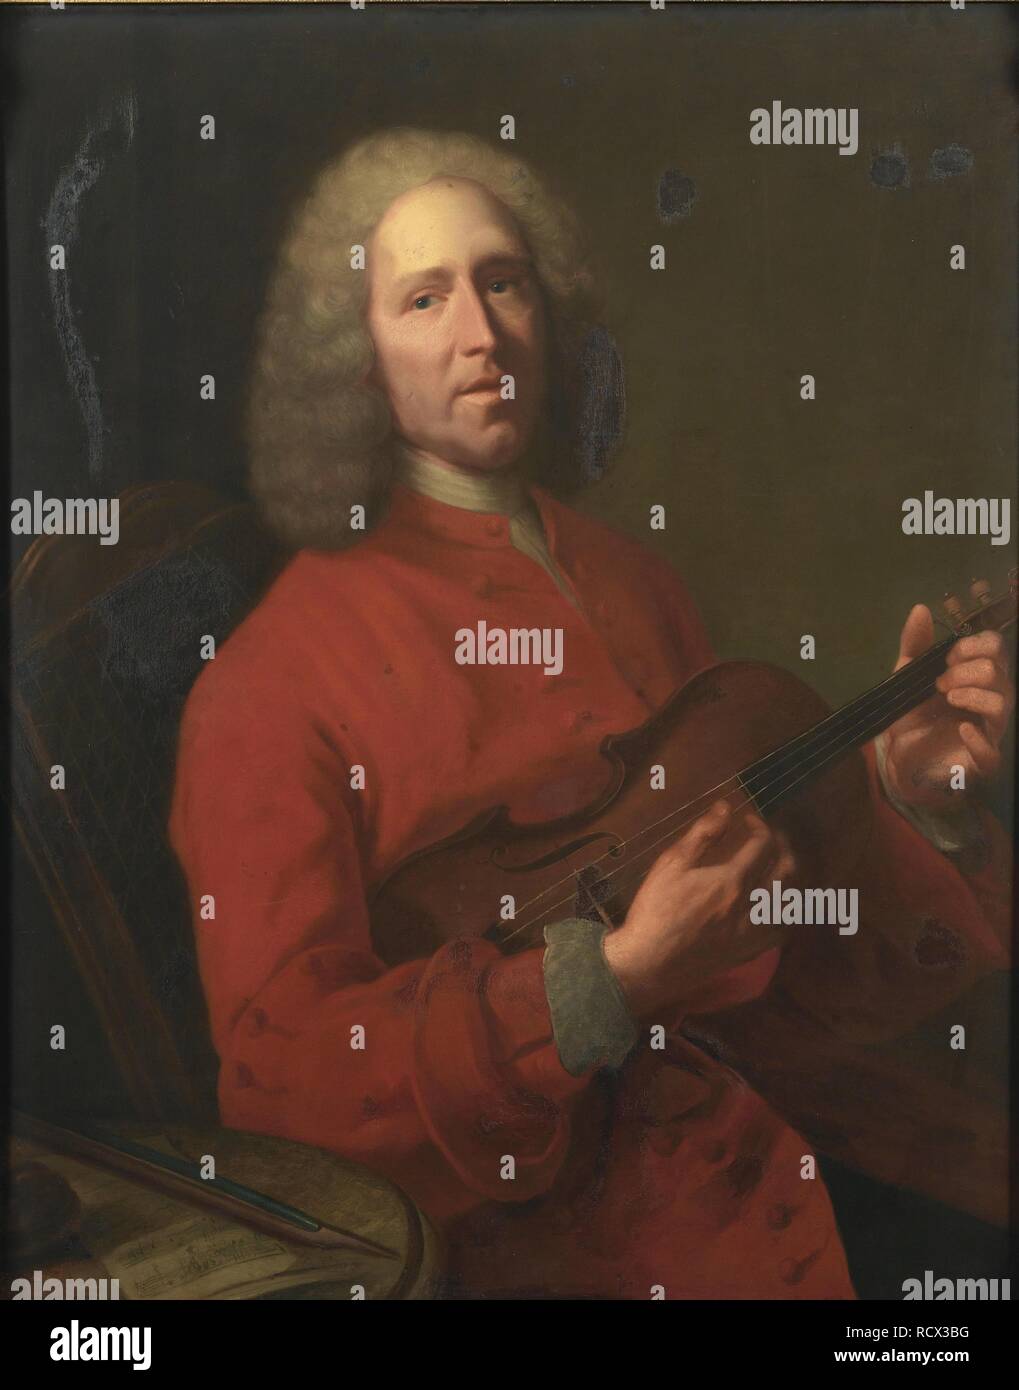 Portrait of the composer Jean-Philippe Rameau (1683-1764). Museum: PRIVATE COLLECTION. Author: Aved, Jacques-Andrè Joseph. Stock Photo